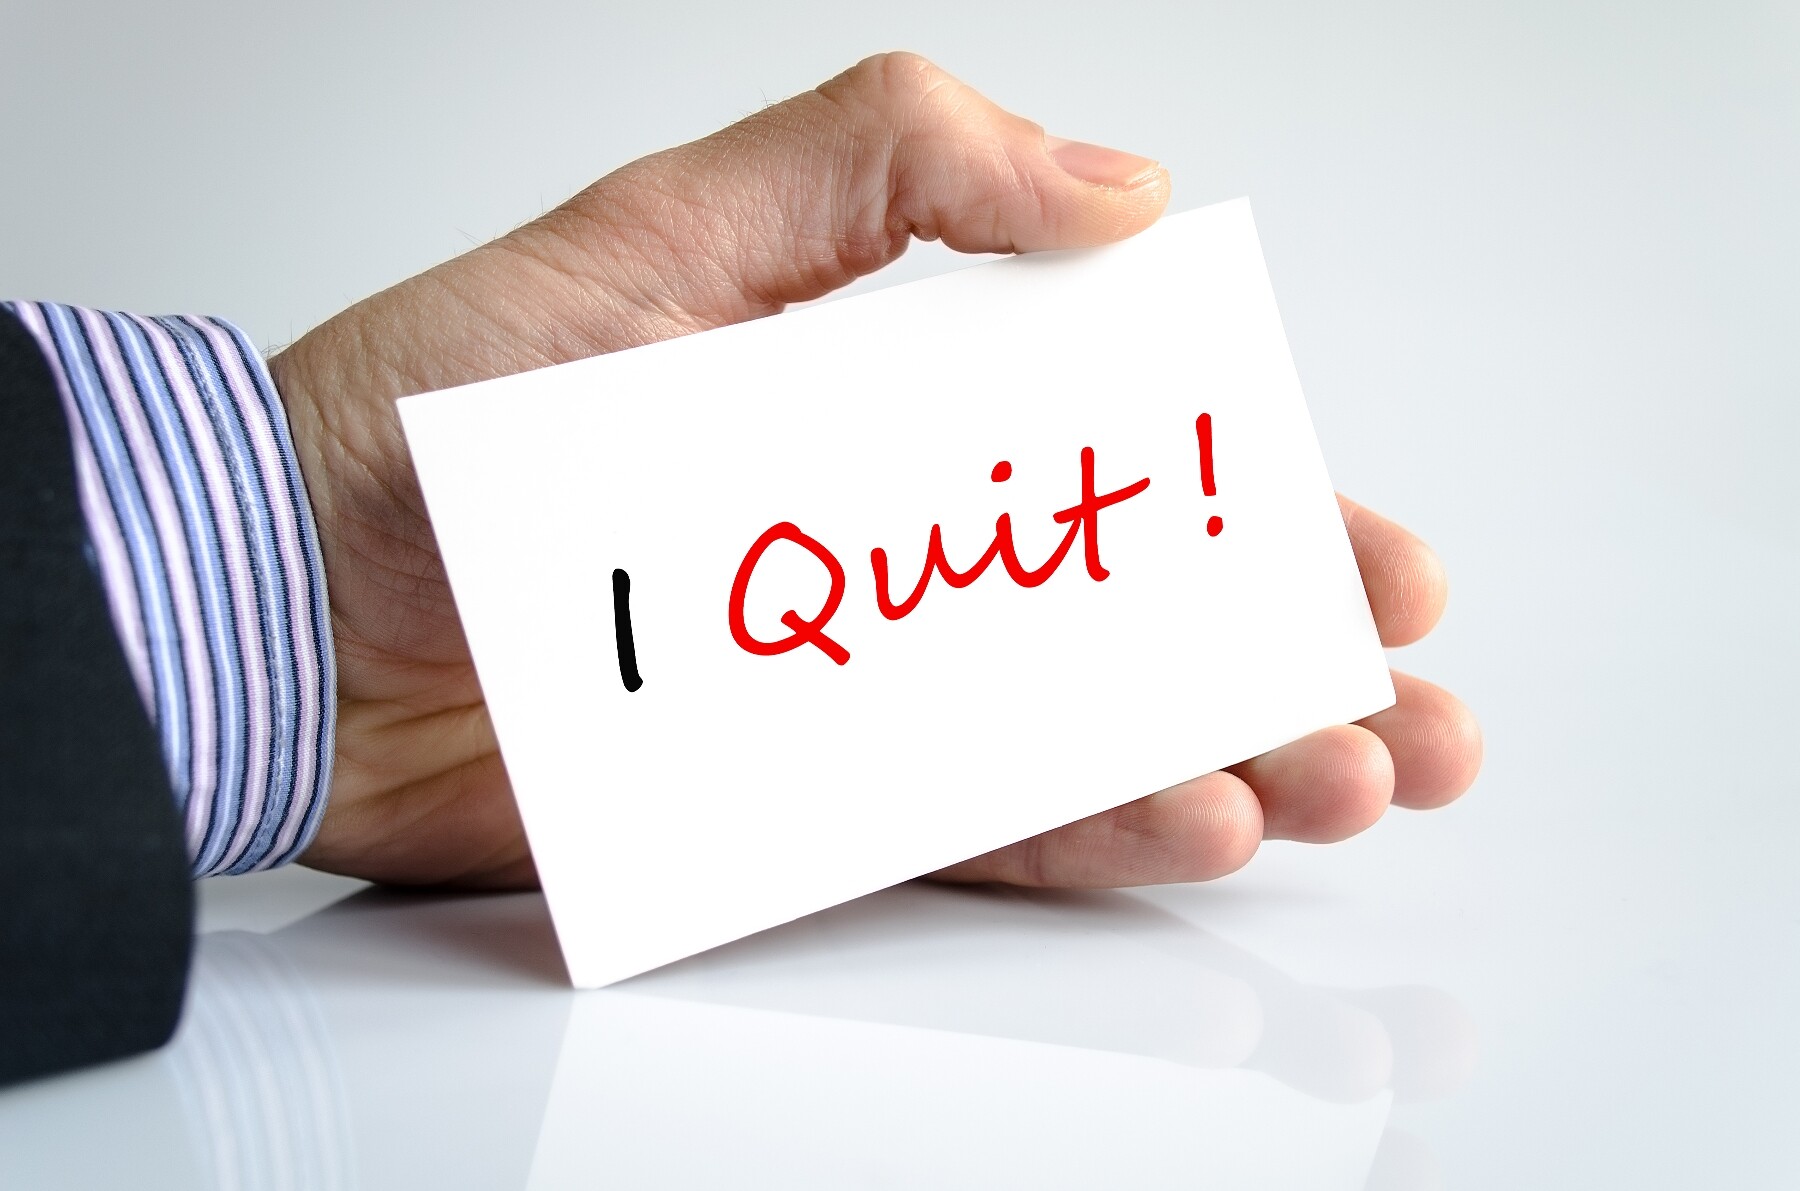 Man holding write card with I QUIT written on it